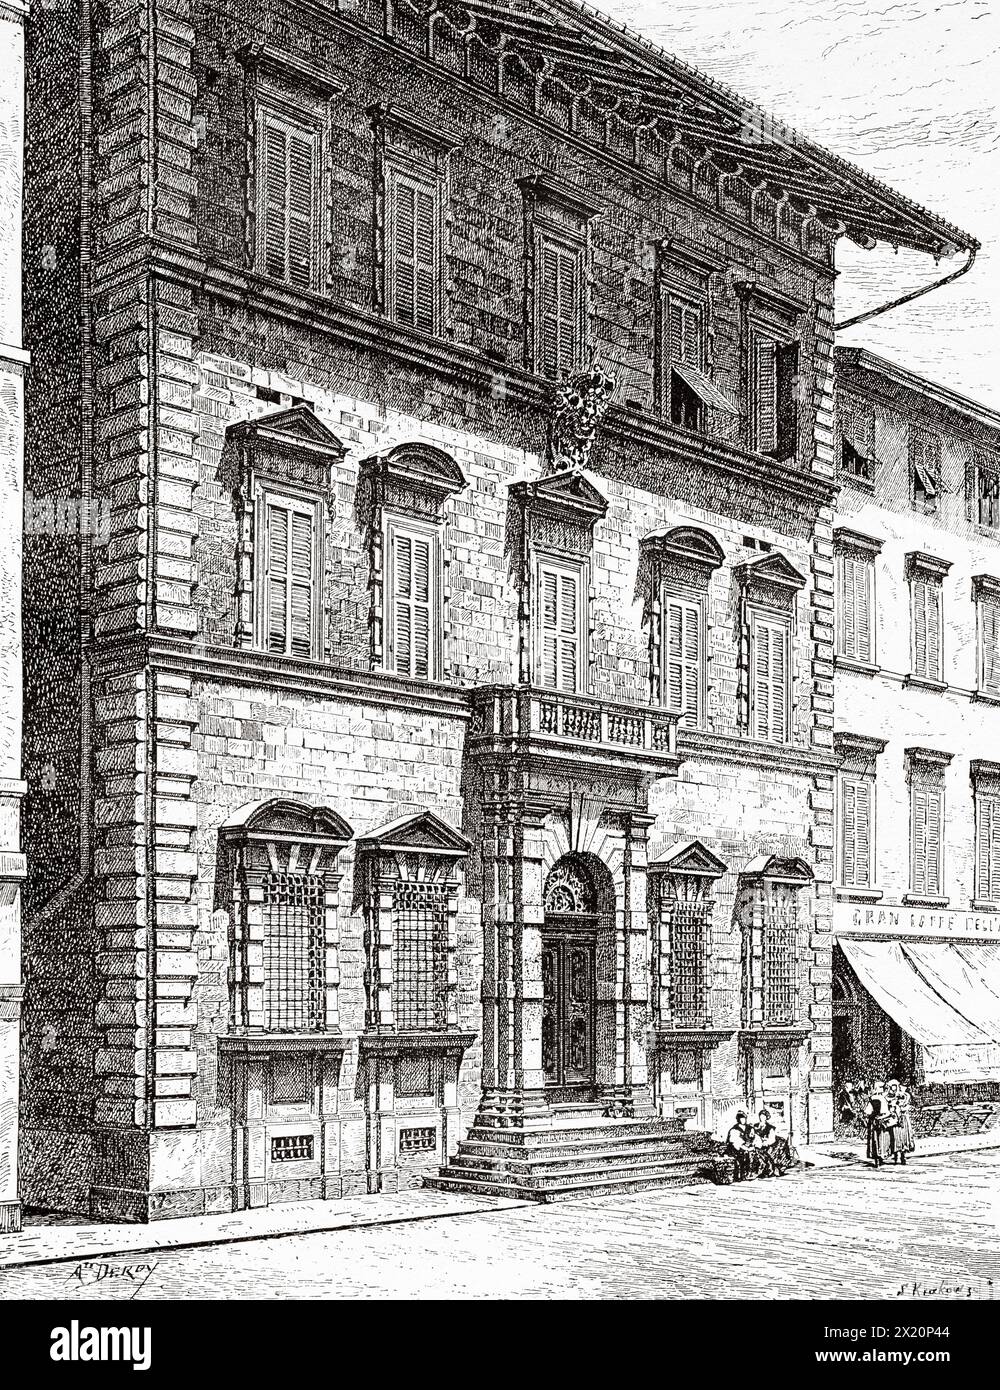 Lungarno Pacinoti. The Palazzo Lanfreducci. Palazzo Upezzinghi or Palazzo Alla Giornata is a late-Mannerist or early Baroque-style palace located on Lungarno Pacinotti on the north bank of the Arno river, Pisa. Tuscany, Italy. Europe. Drawing by Auguste Deroy (1823 - 1906) Travel through Tuscany 1881 by Eugene Muntz (1845 - 1902) Le Tour du Monde 1886 Stock Photo